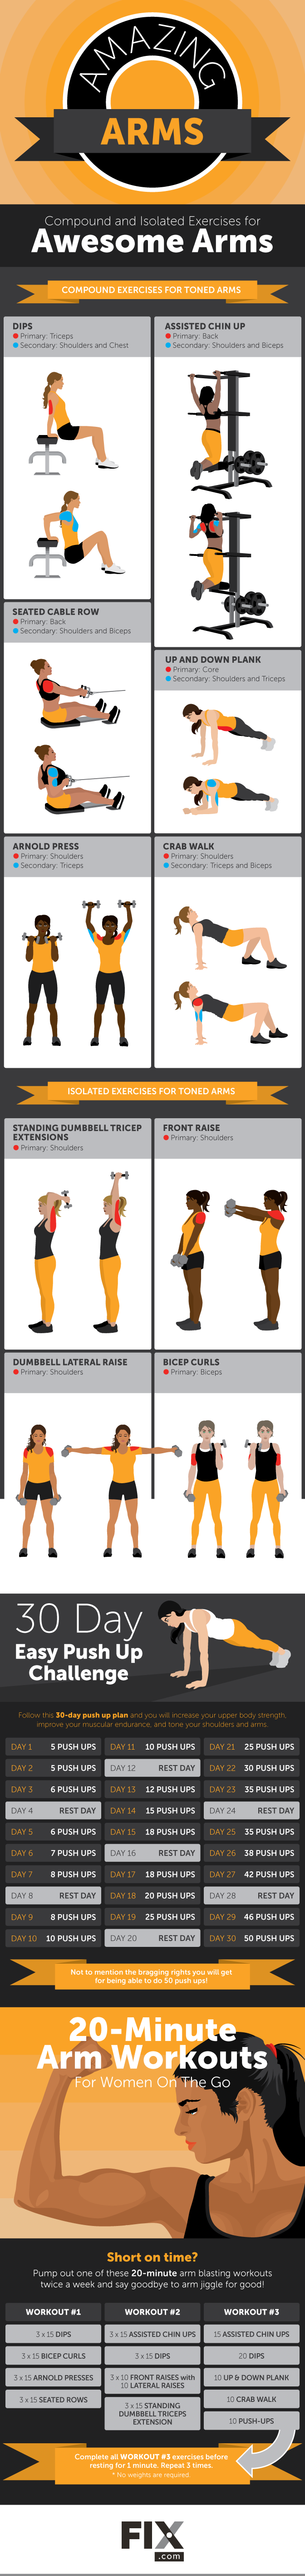 The Best Arm Exercises & Workouts